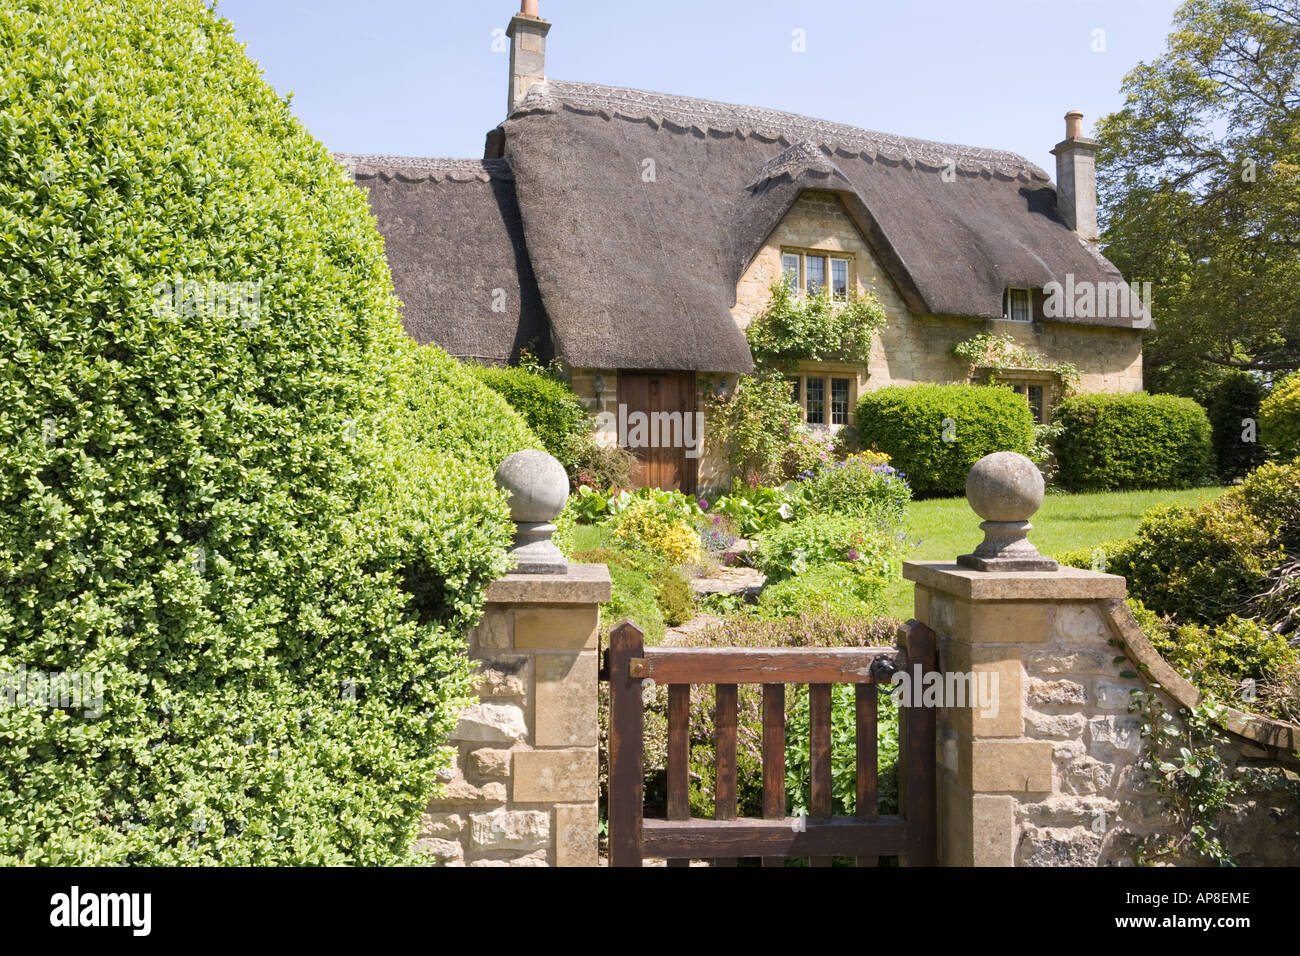 A cottage on the outskirts of the Cotswold town of Chipping Campden, Gloucestershire Stock Photo